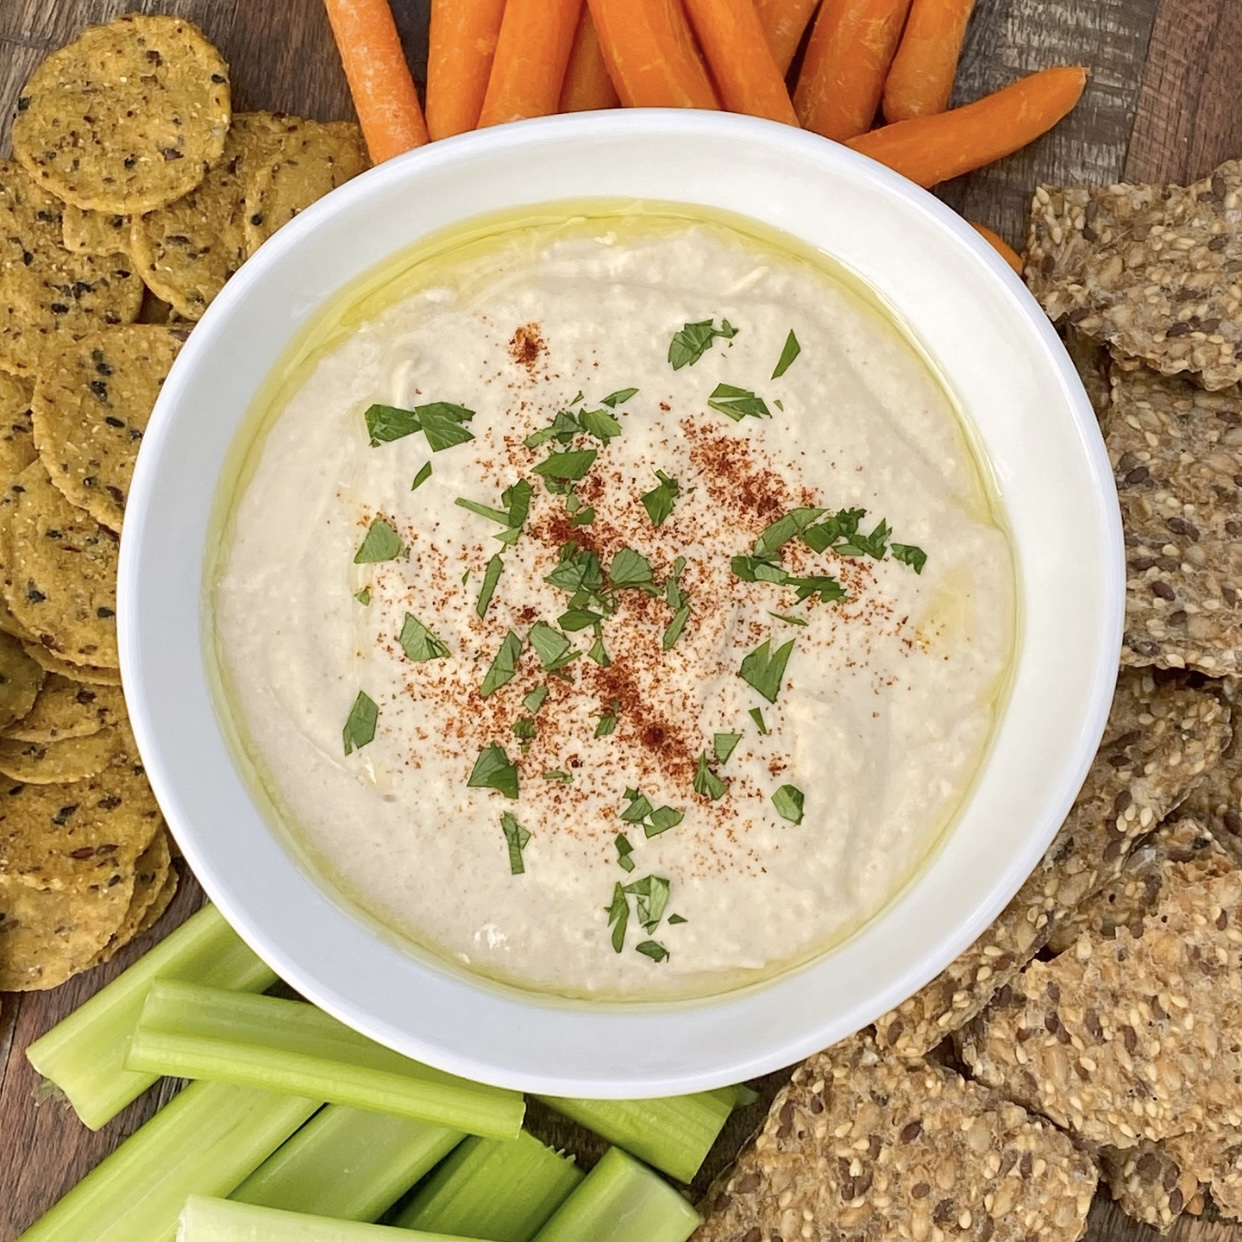 White bean hummus in a white bowl with crackers, celery sticks, and carrots around it. Perfect for a casual outdoor fall gathering.